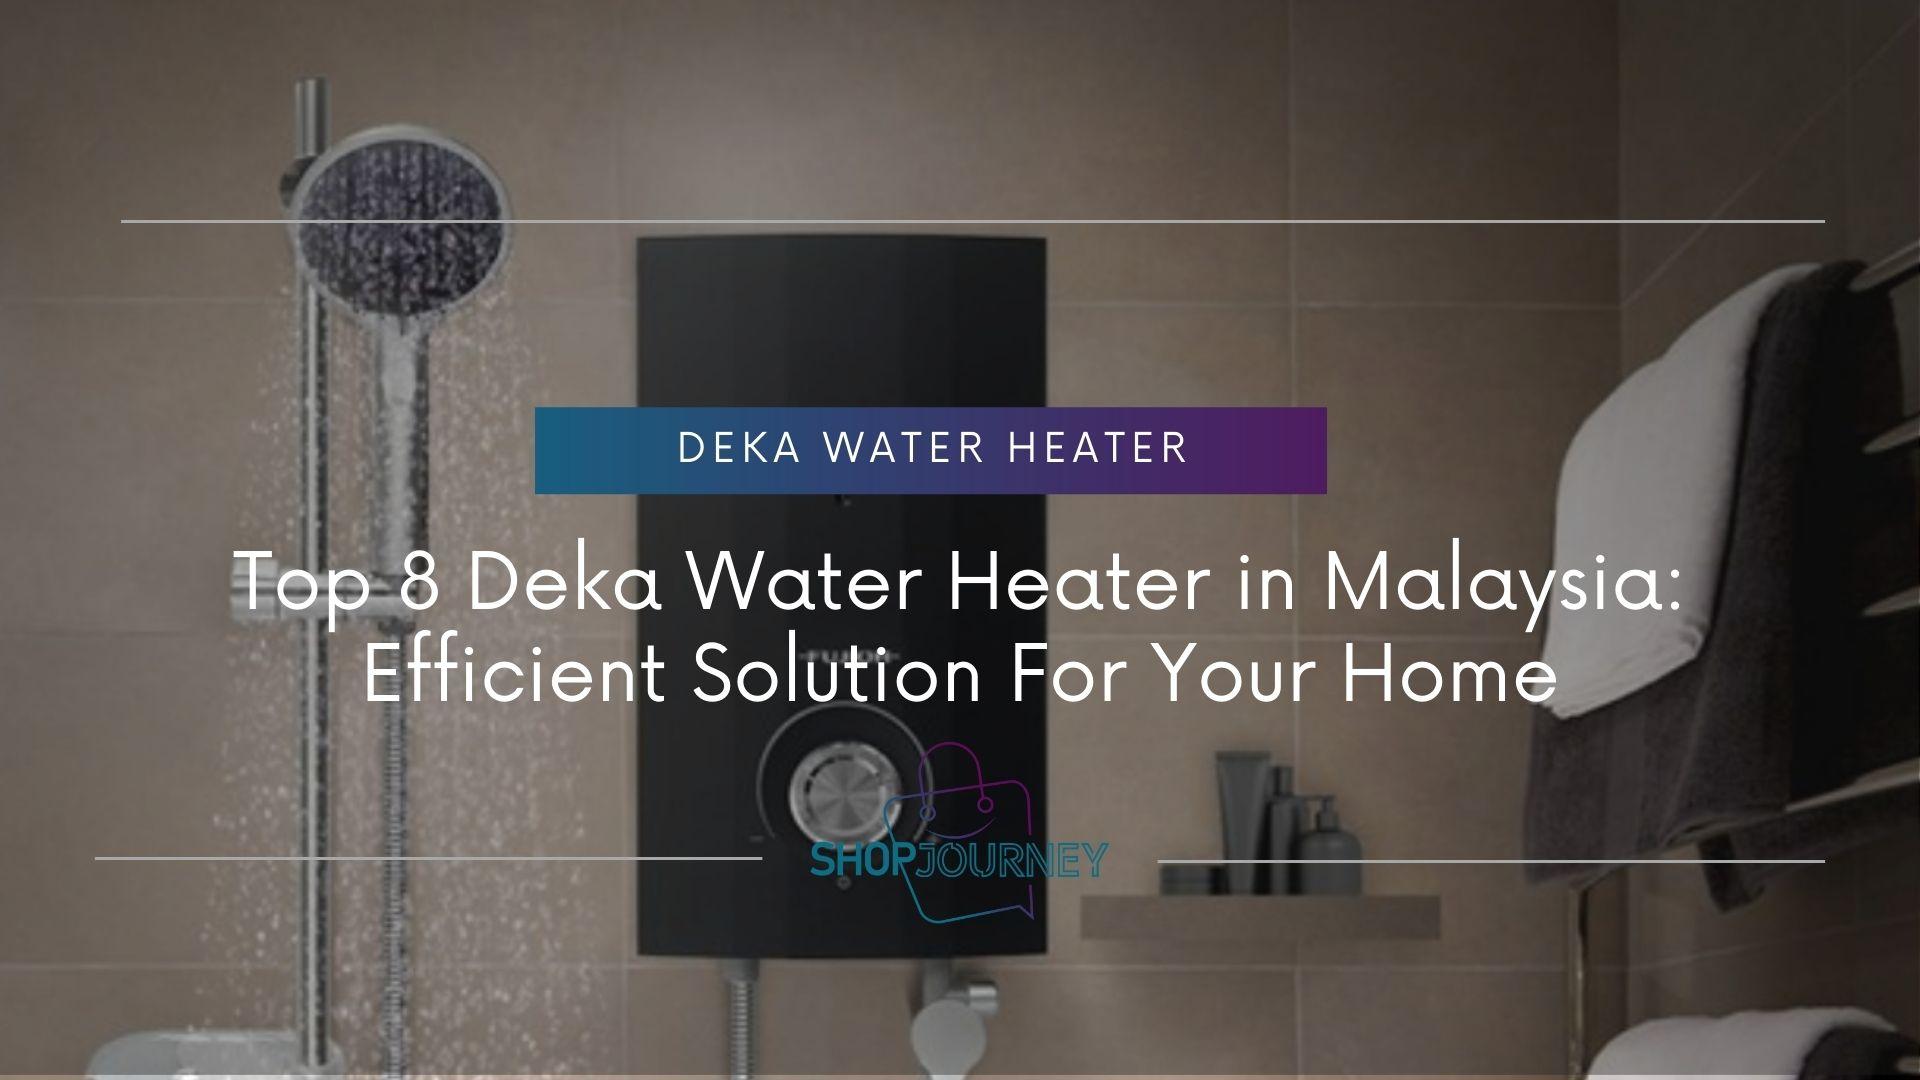 Deka Water Heater: The Efficient Solution for Your Home - Shop Journey